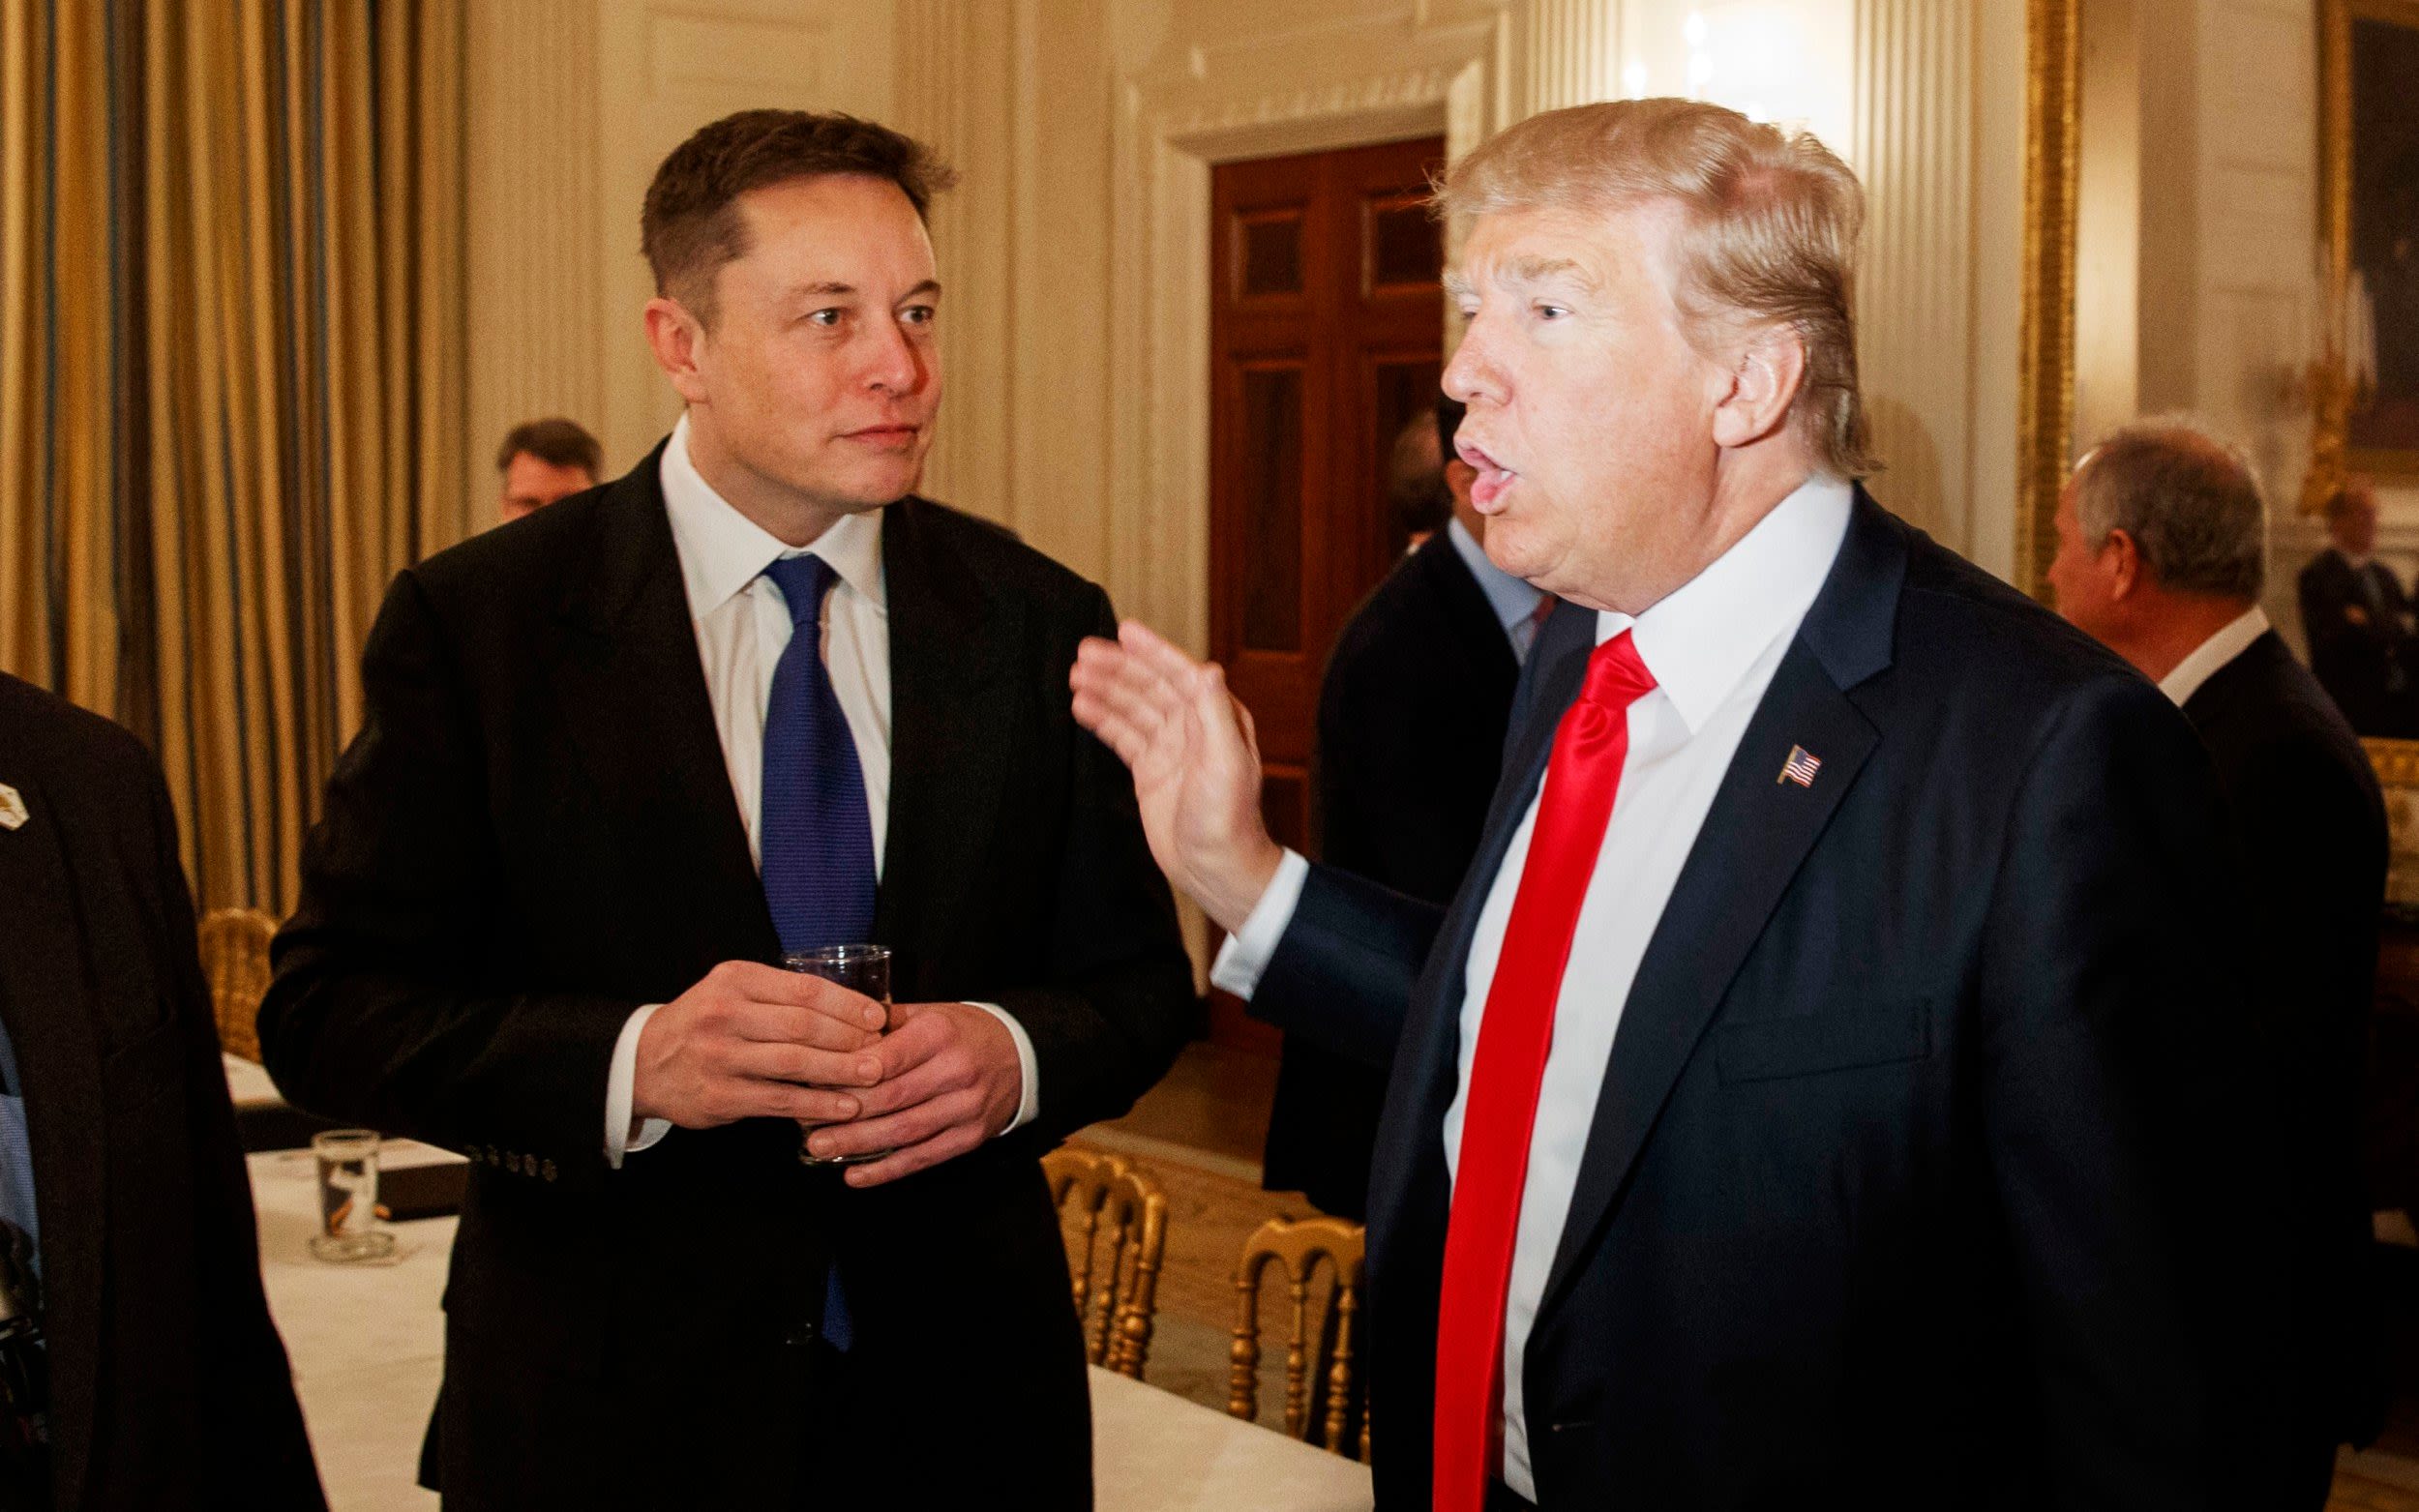 Elon Musk backs Donald Trump with major donation to campaigning fund